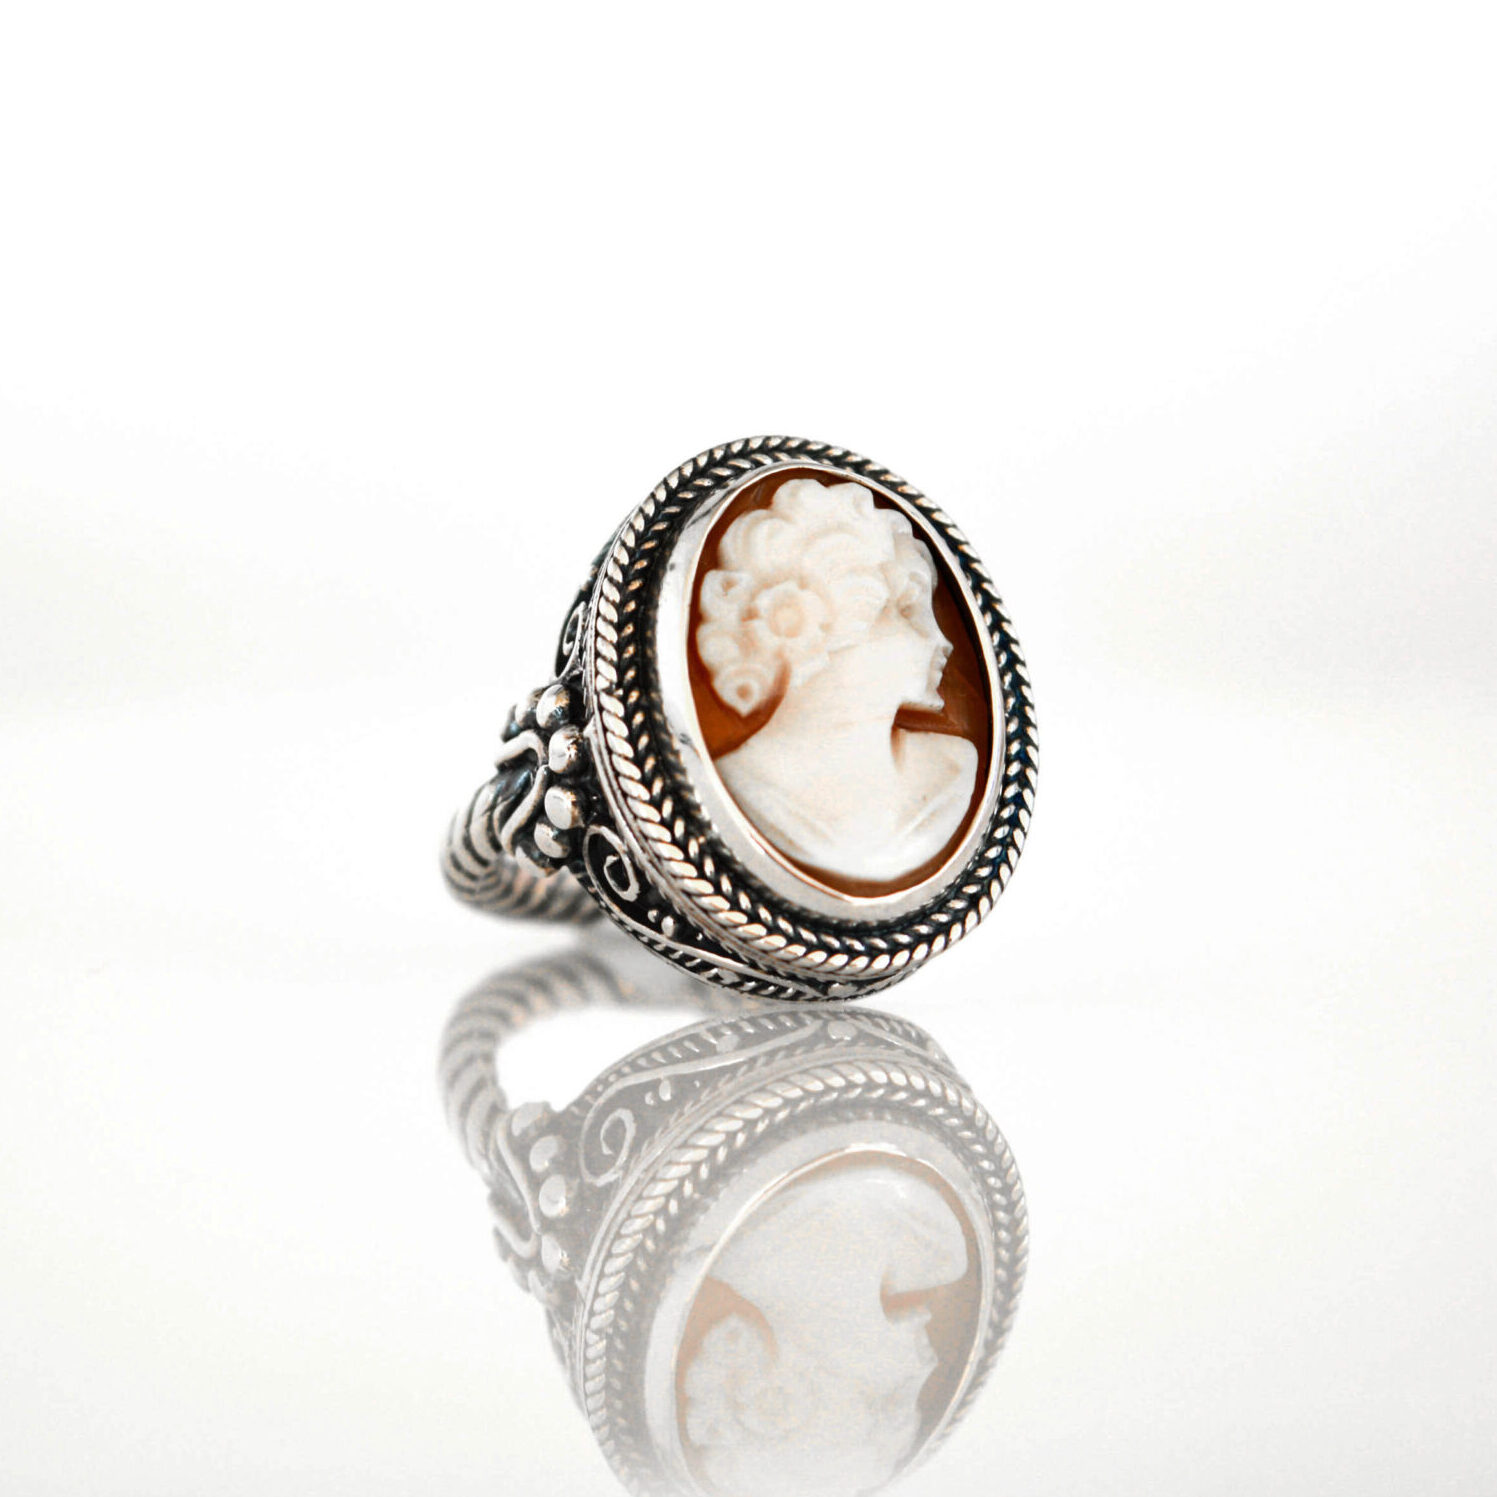 Blue Cameo Ring in Antique Silver | Ragtrader Vintage